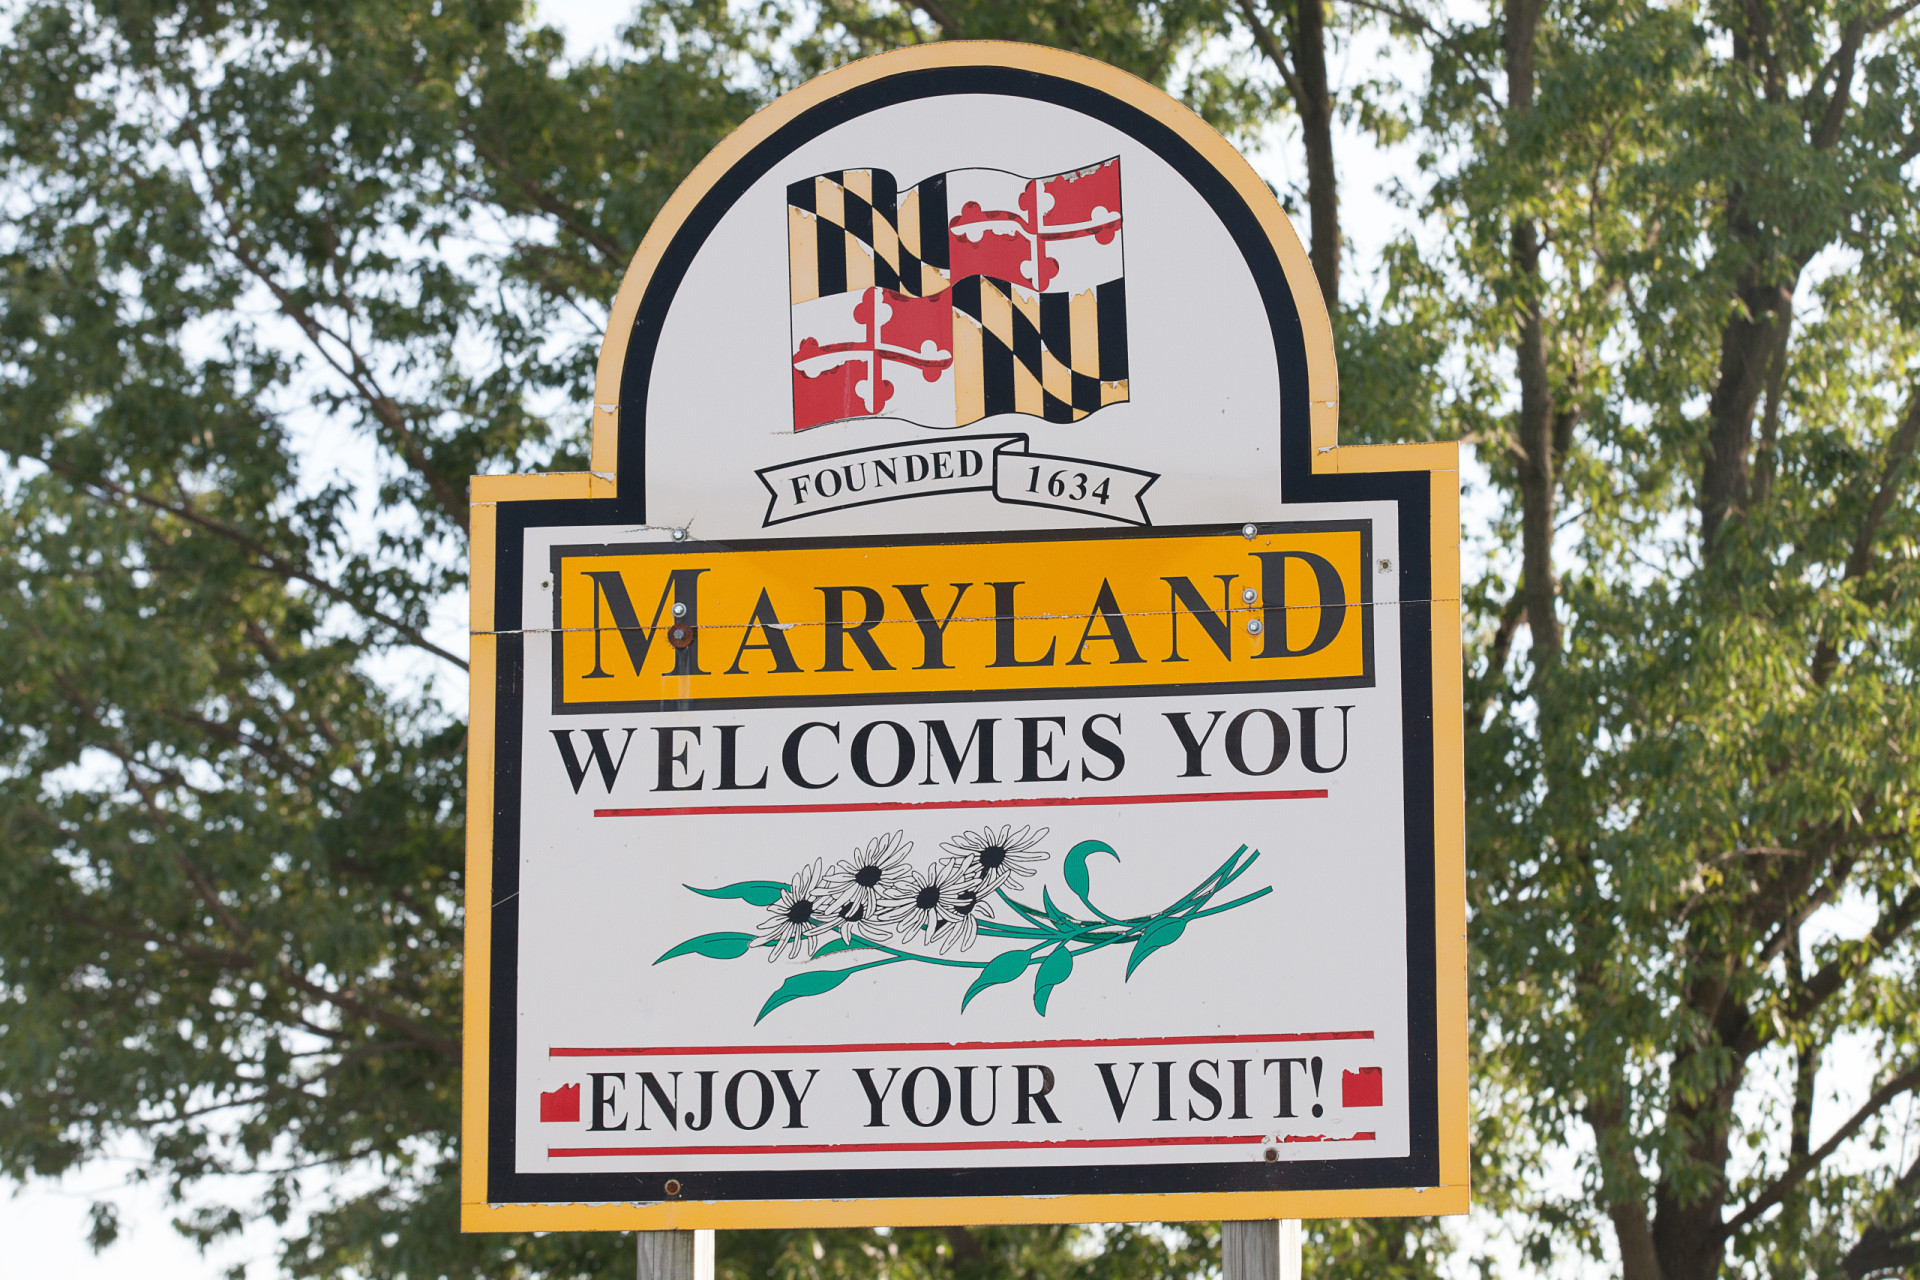 <p>The state welcome sign features the state flag as well as the state flower, the black-eyed Susan.</p><p>You may also like:<a href="https://www.starsinsider.com/n/410687?utm_source=msn.com&utm_medium=display&utm_campaign=referral_description&utm_content=572689en-en"> Surprising uses for apple cider vinegar</a></p>